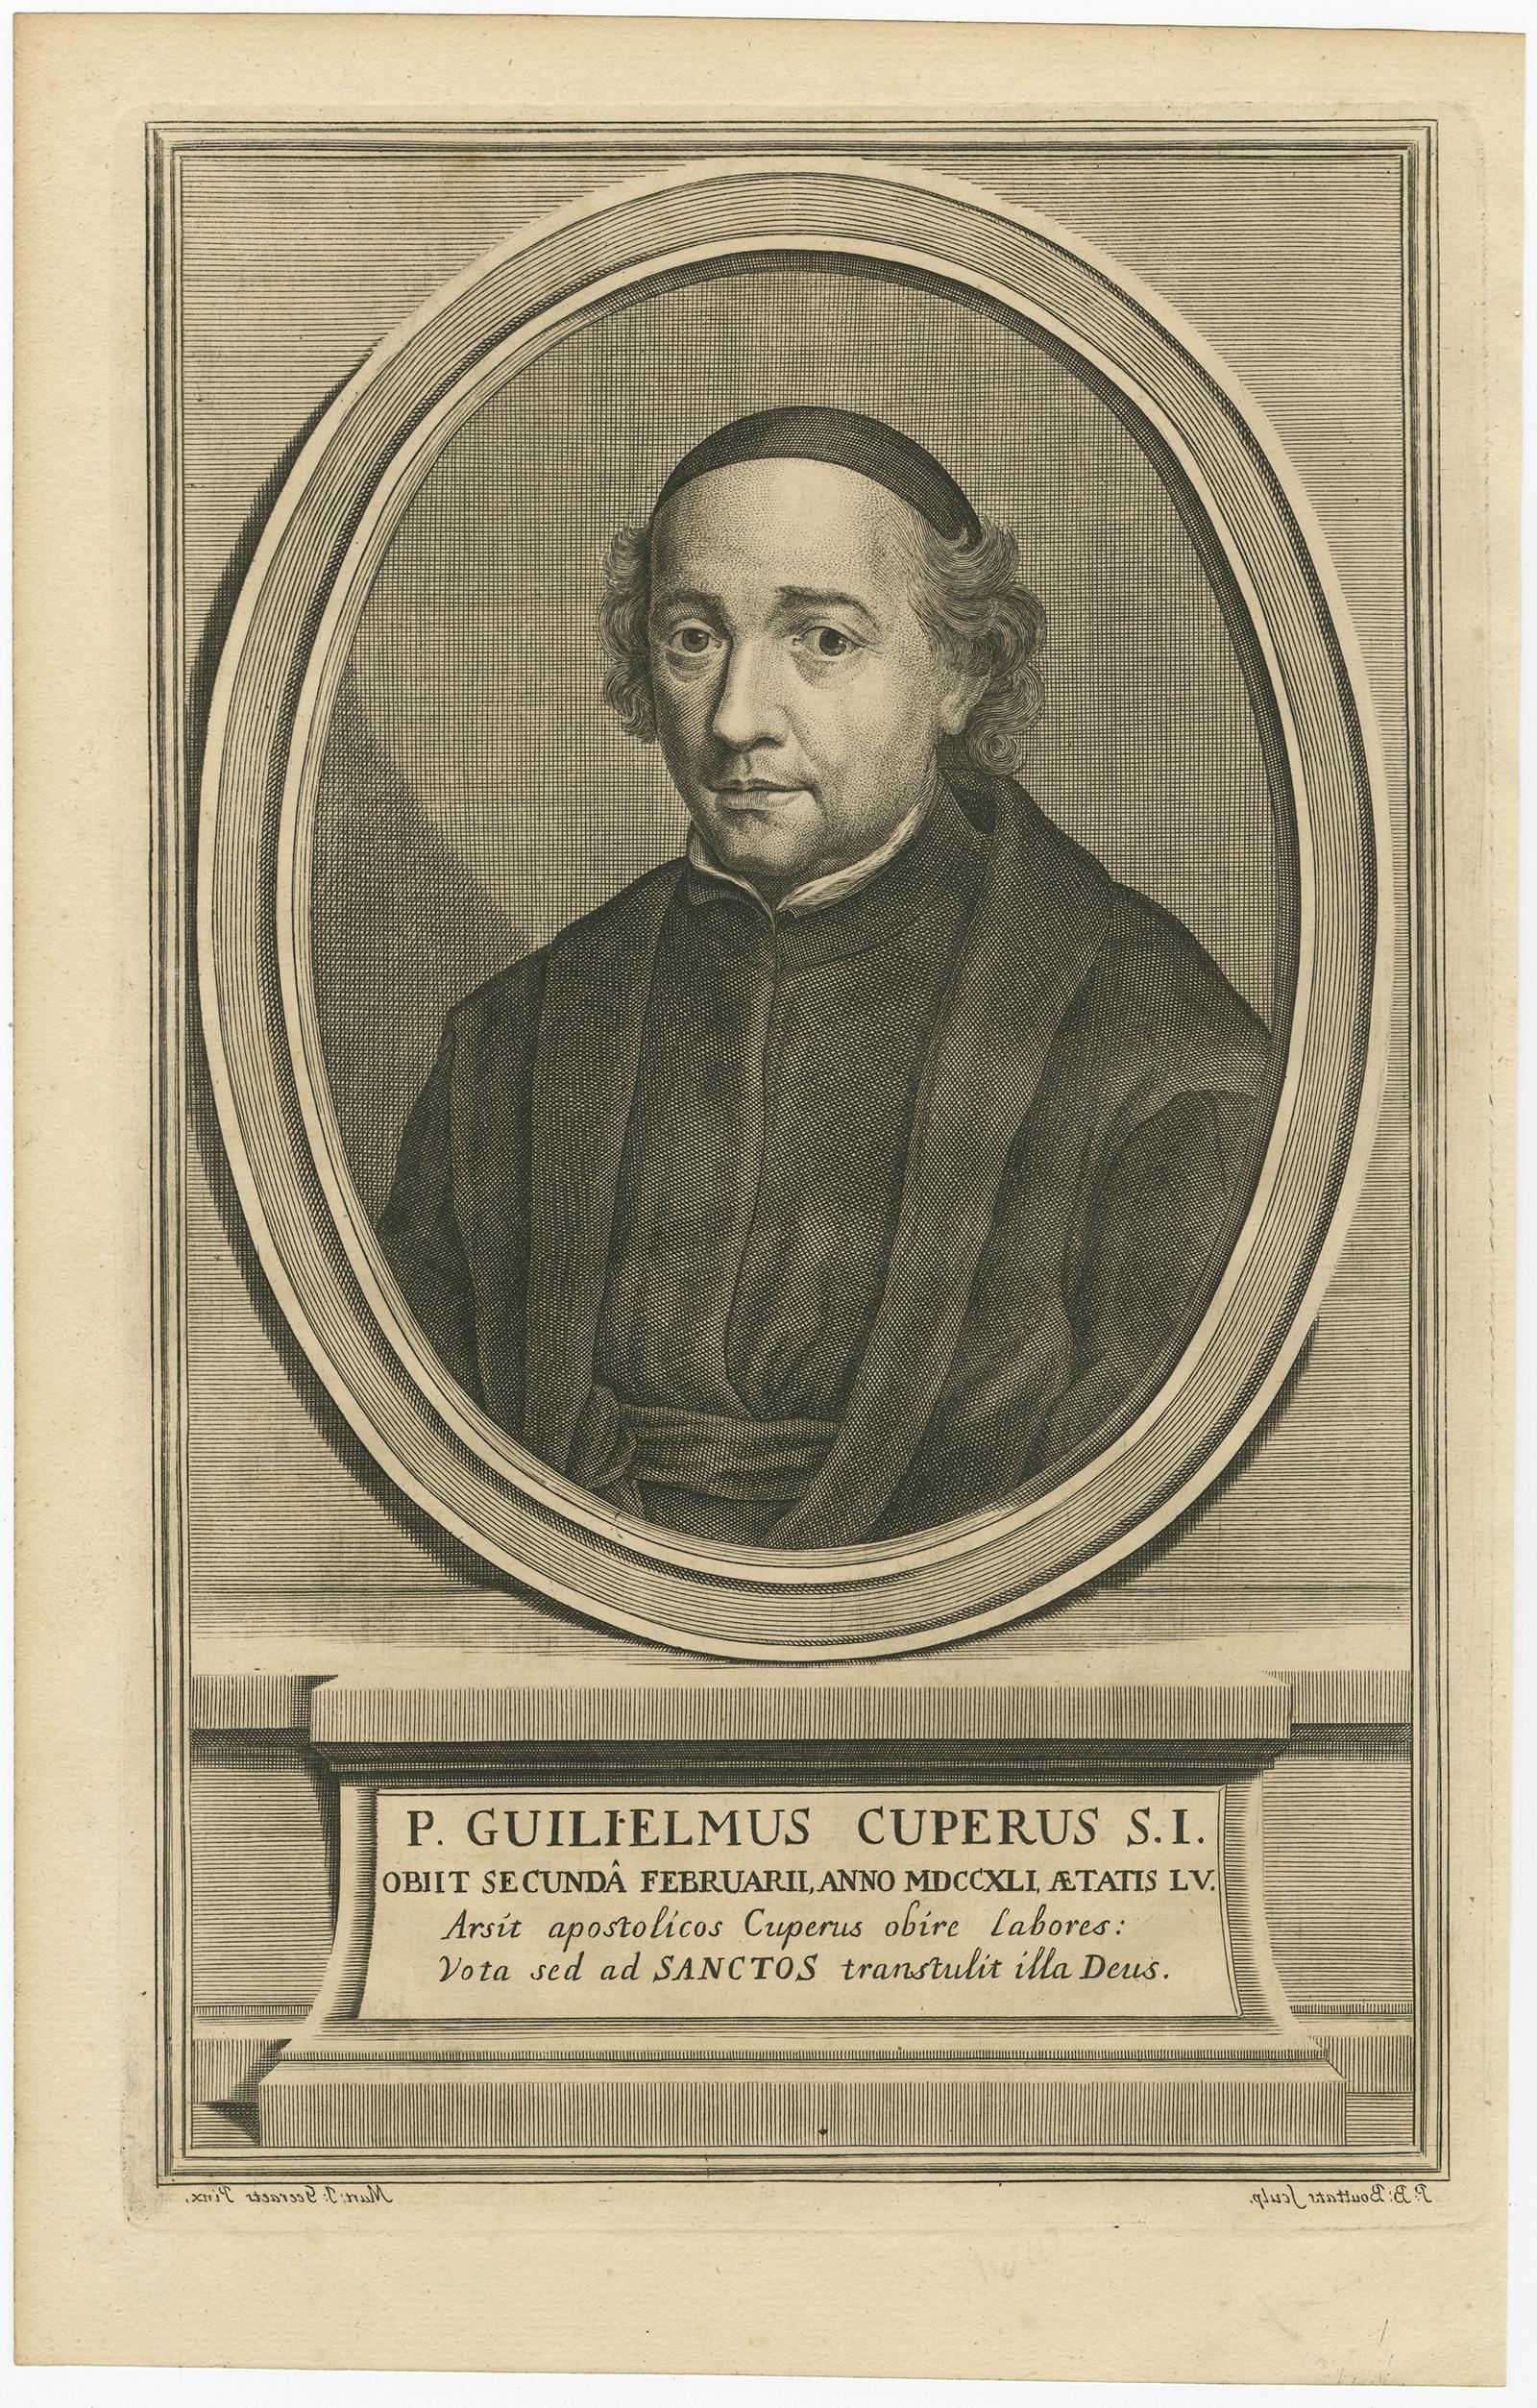 Antique print, titled: 'P. Guilielmus Cuperus (…)' - Portrait of the Jesuit Willem (Guilielmus) Cuperus (1686 - 1741).

Source unknown, to be determined.

Artists and Engravers: Made by 'P. Bouttats' after 'Martinus Josephus